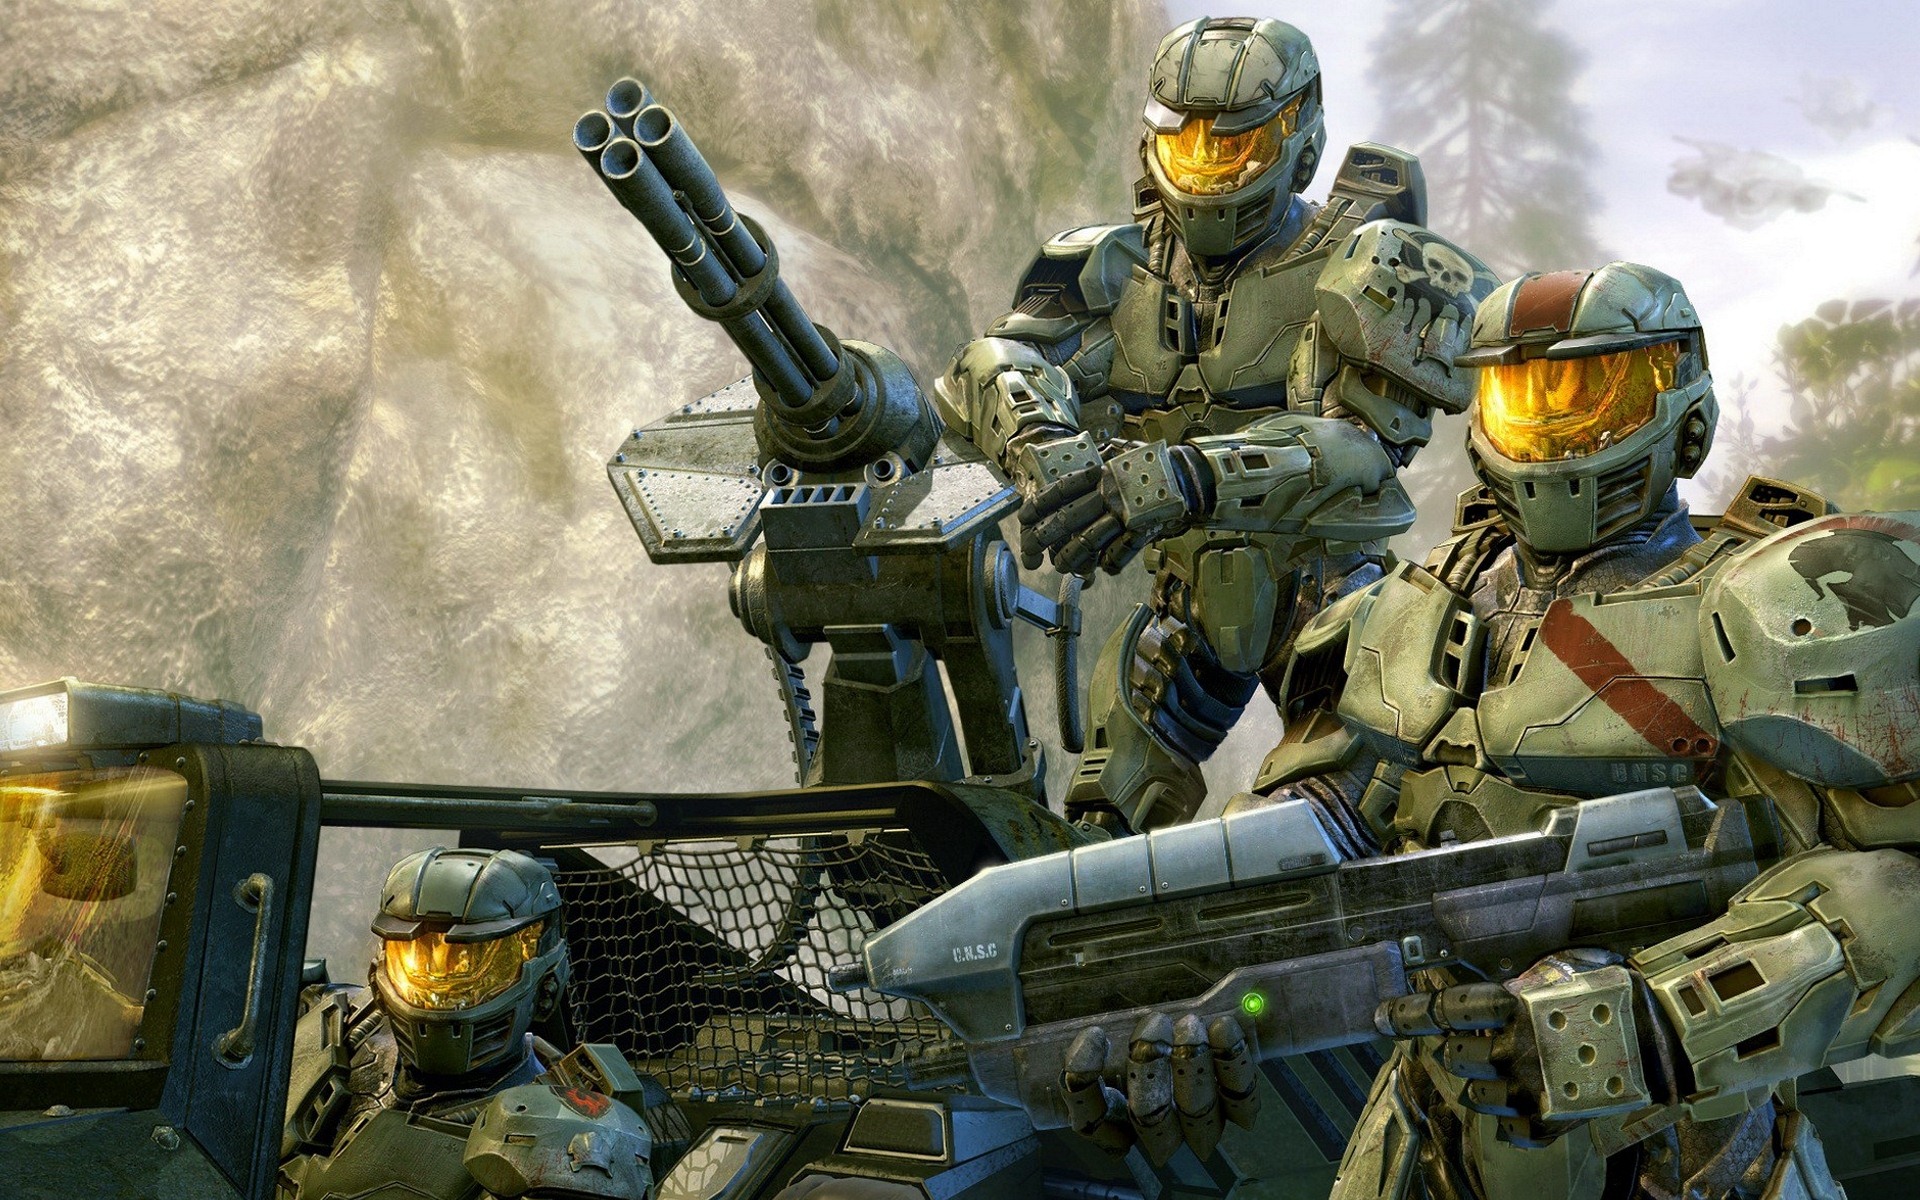 Halo game HD wallpapers #7 - 1920x1200